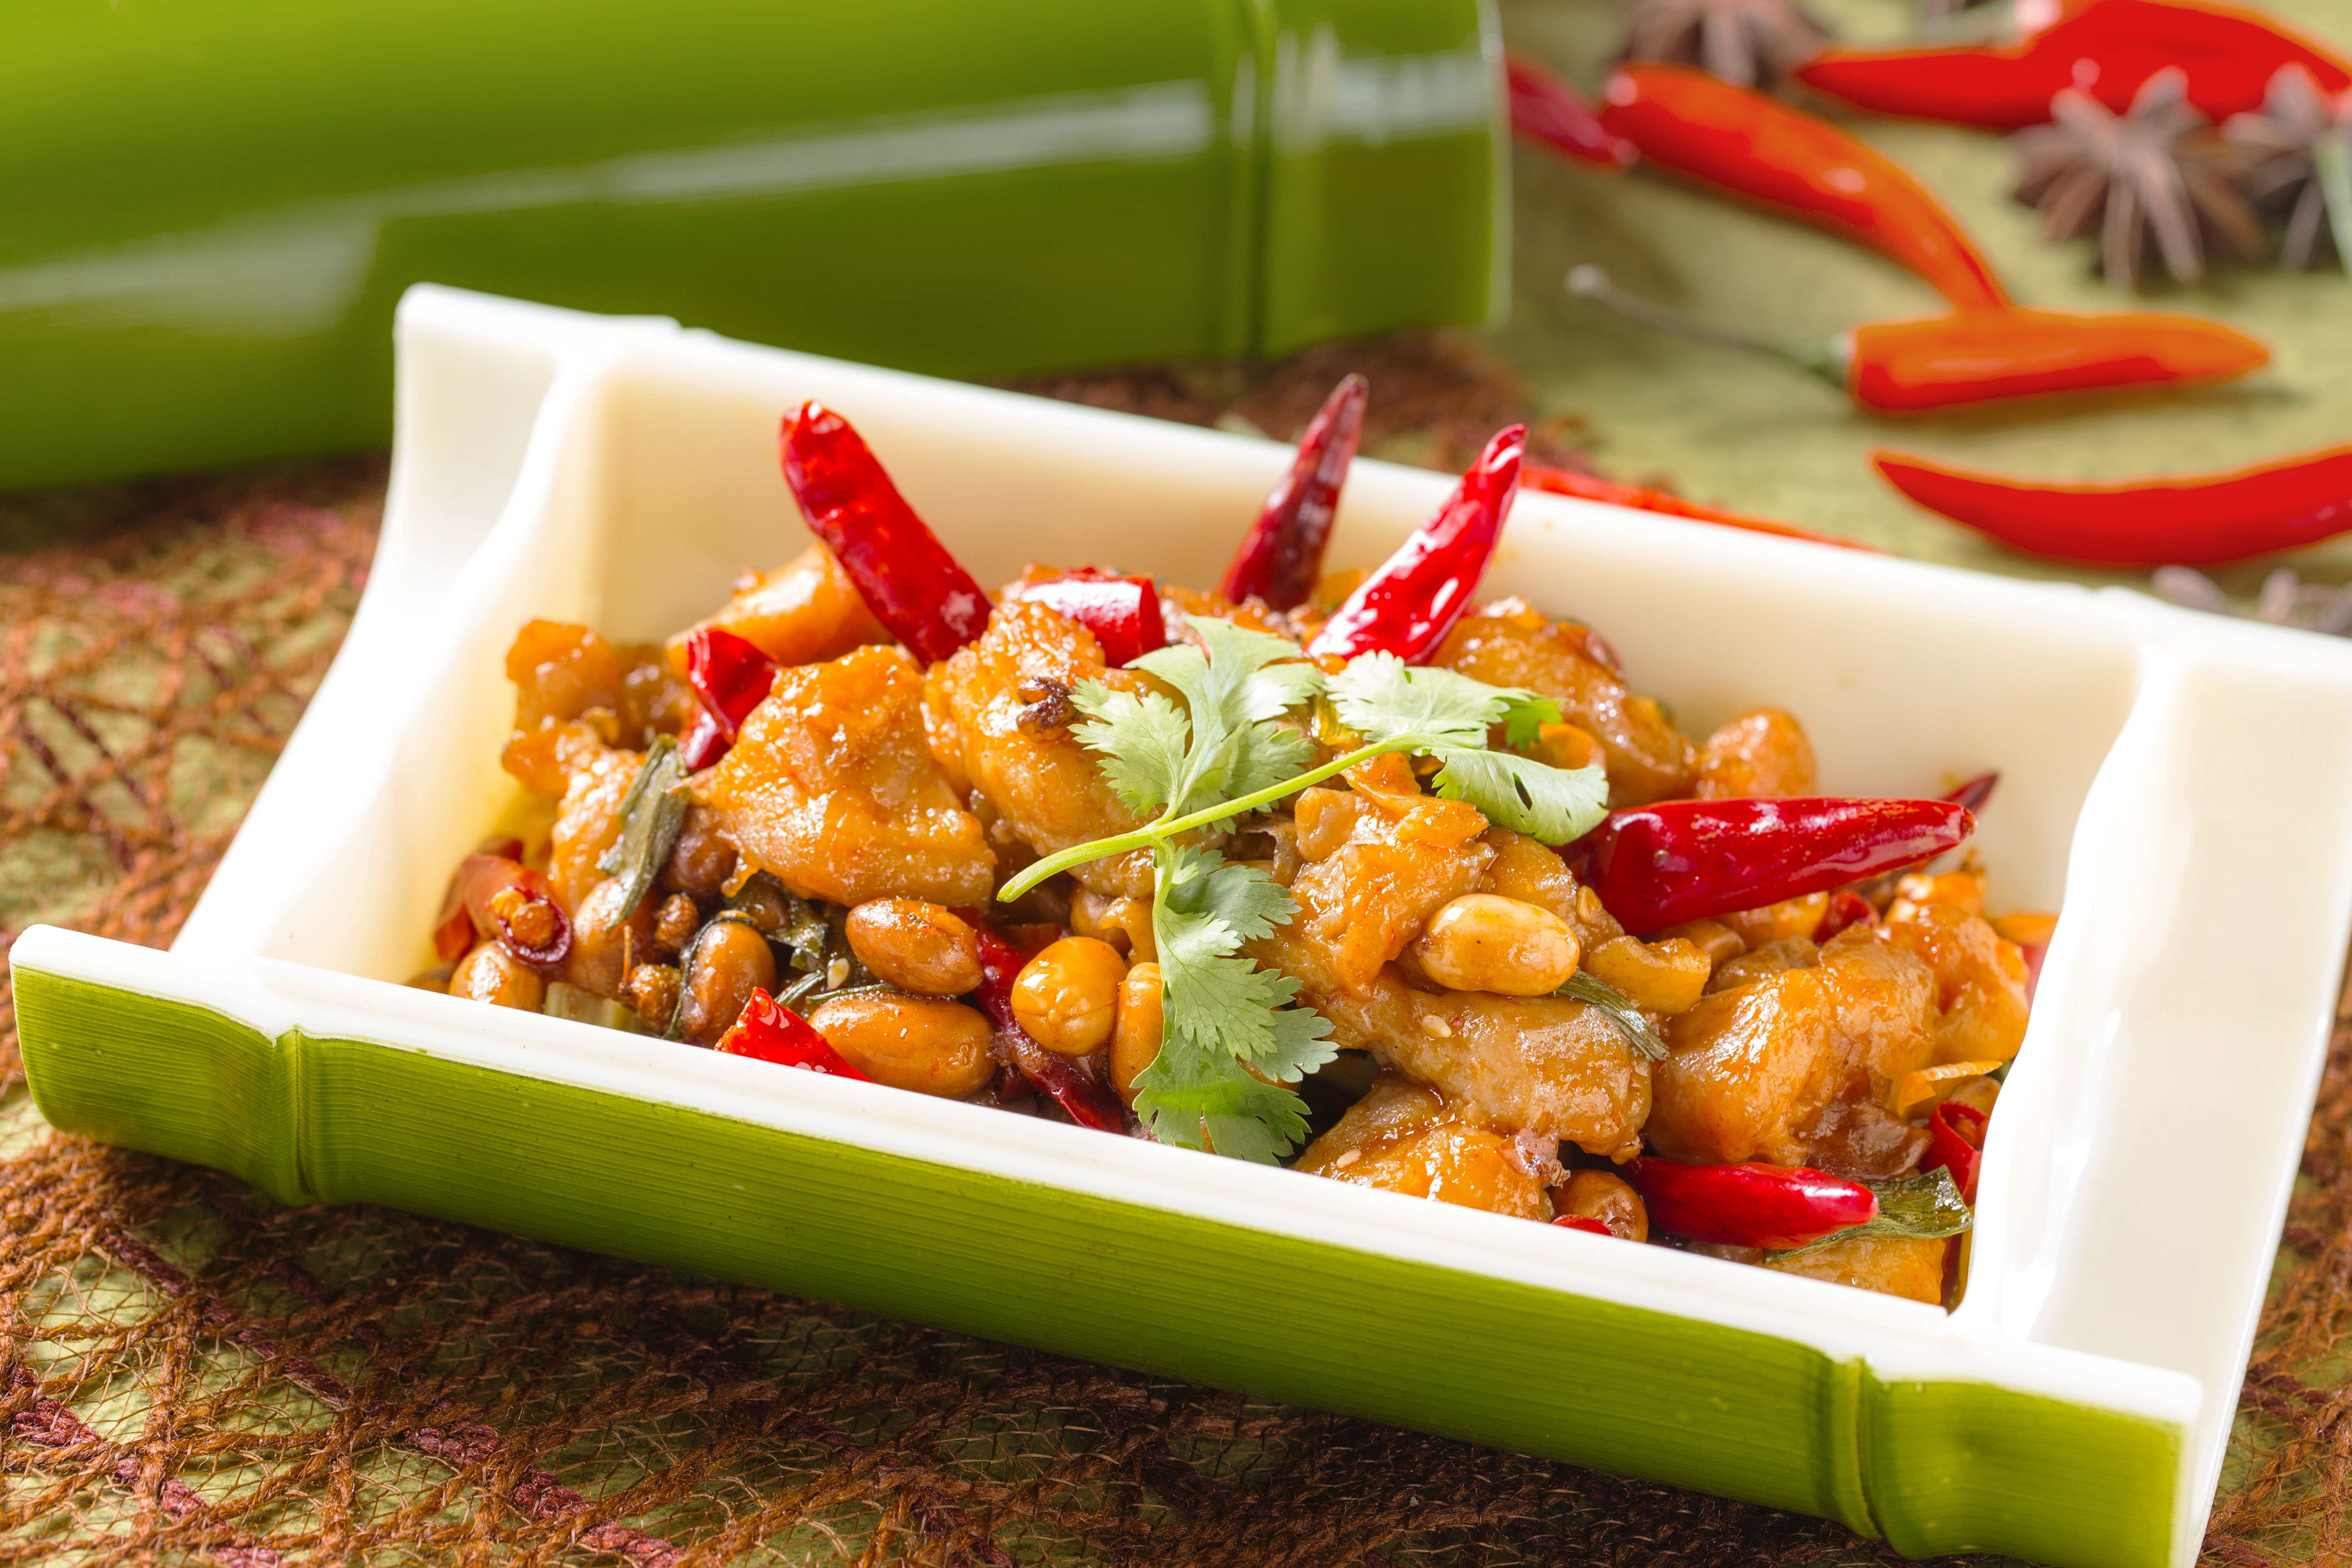 Chicken Cubes with Peanuts in Chili Sauce